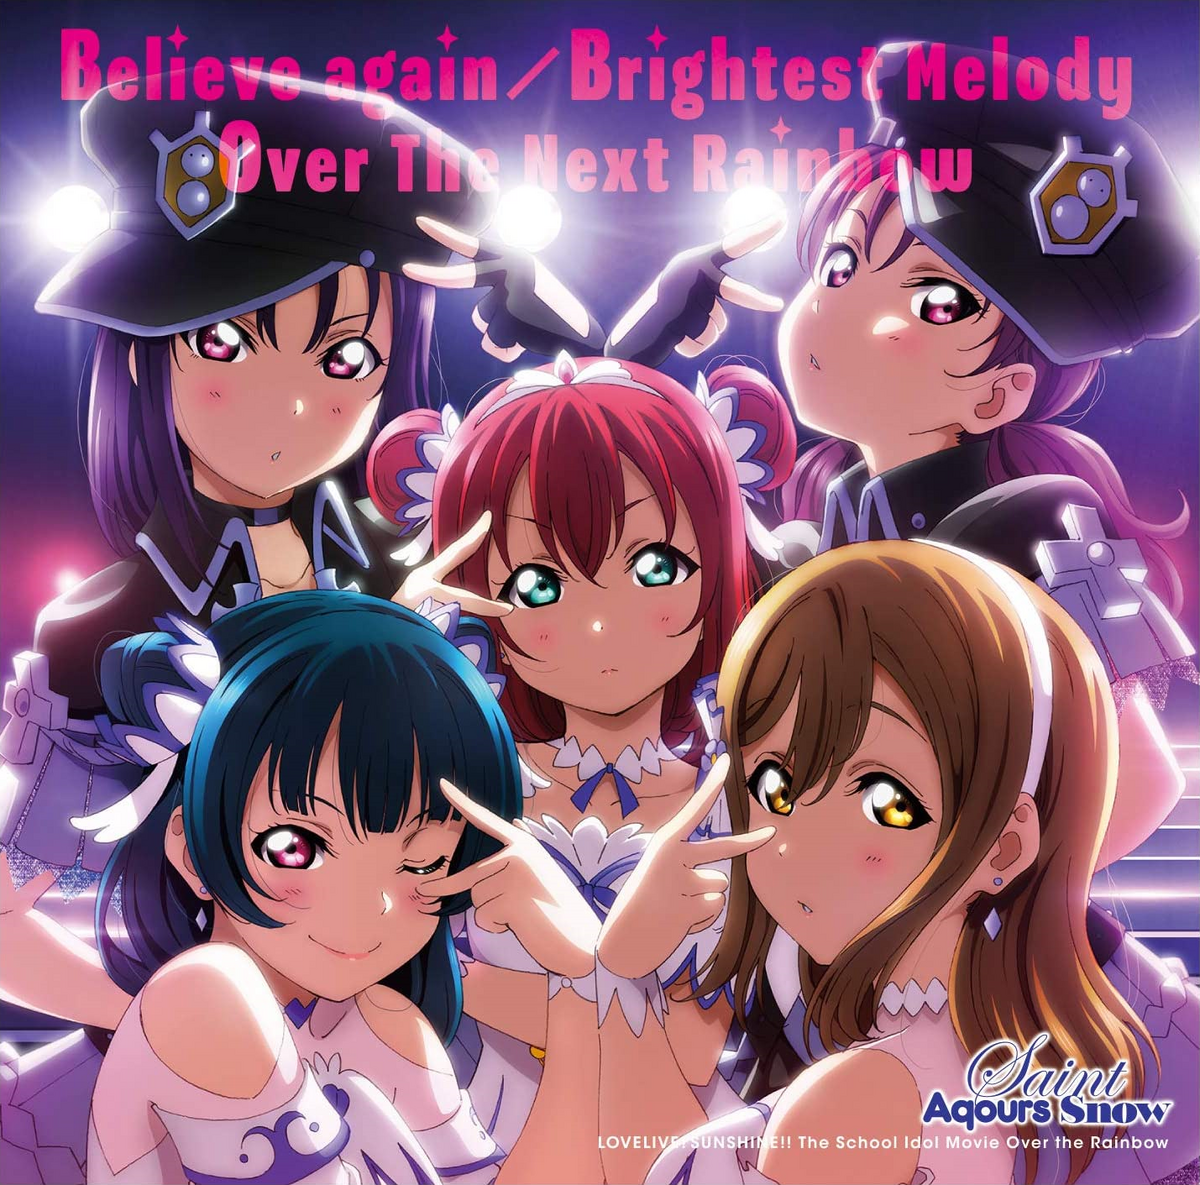 Stream Snow halation but shawty's like a melody in my head by Kotone 琴音